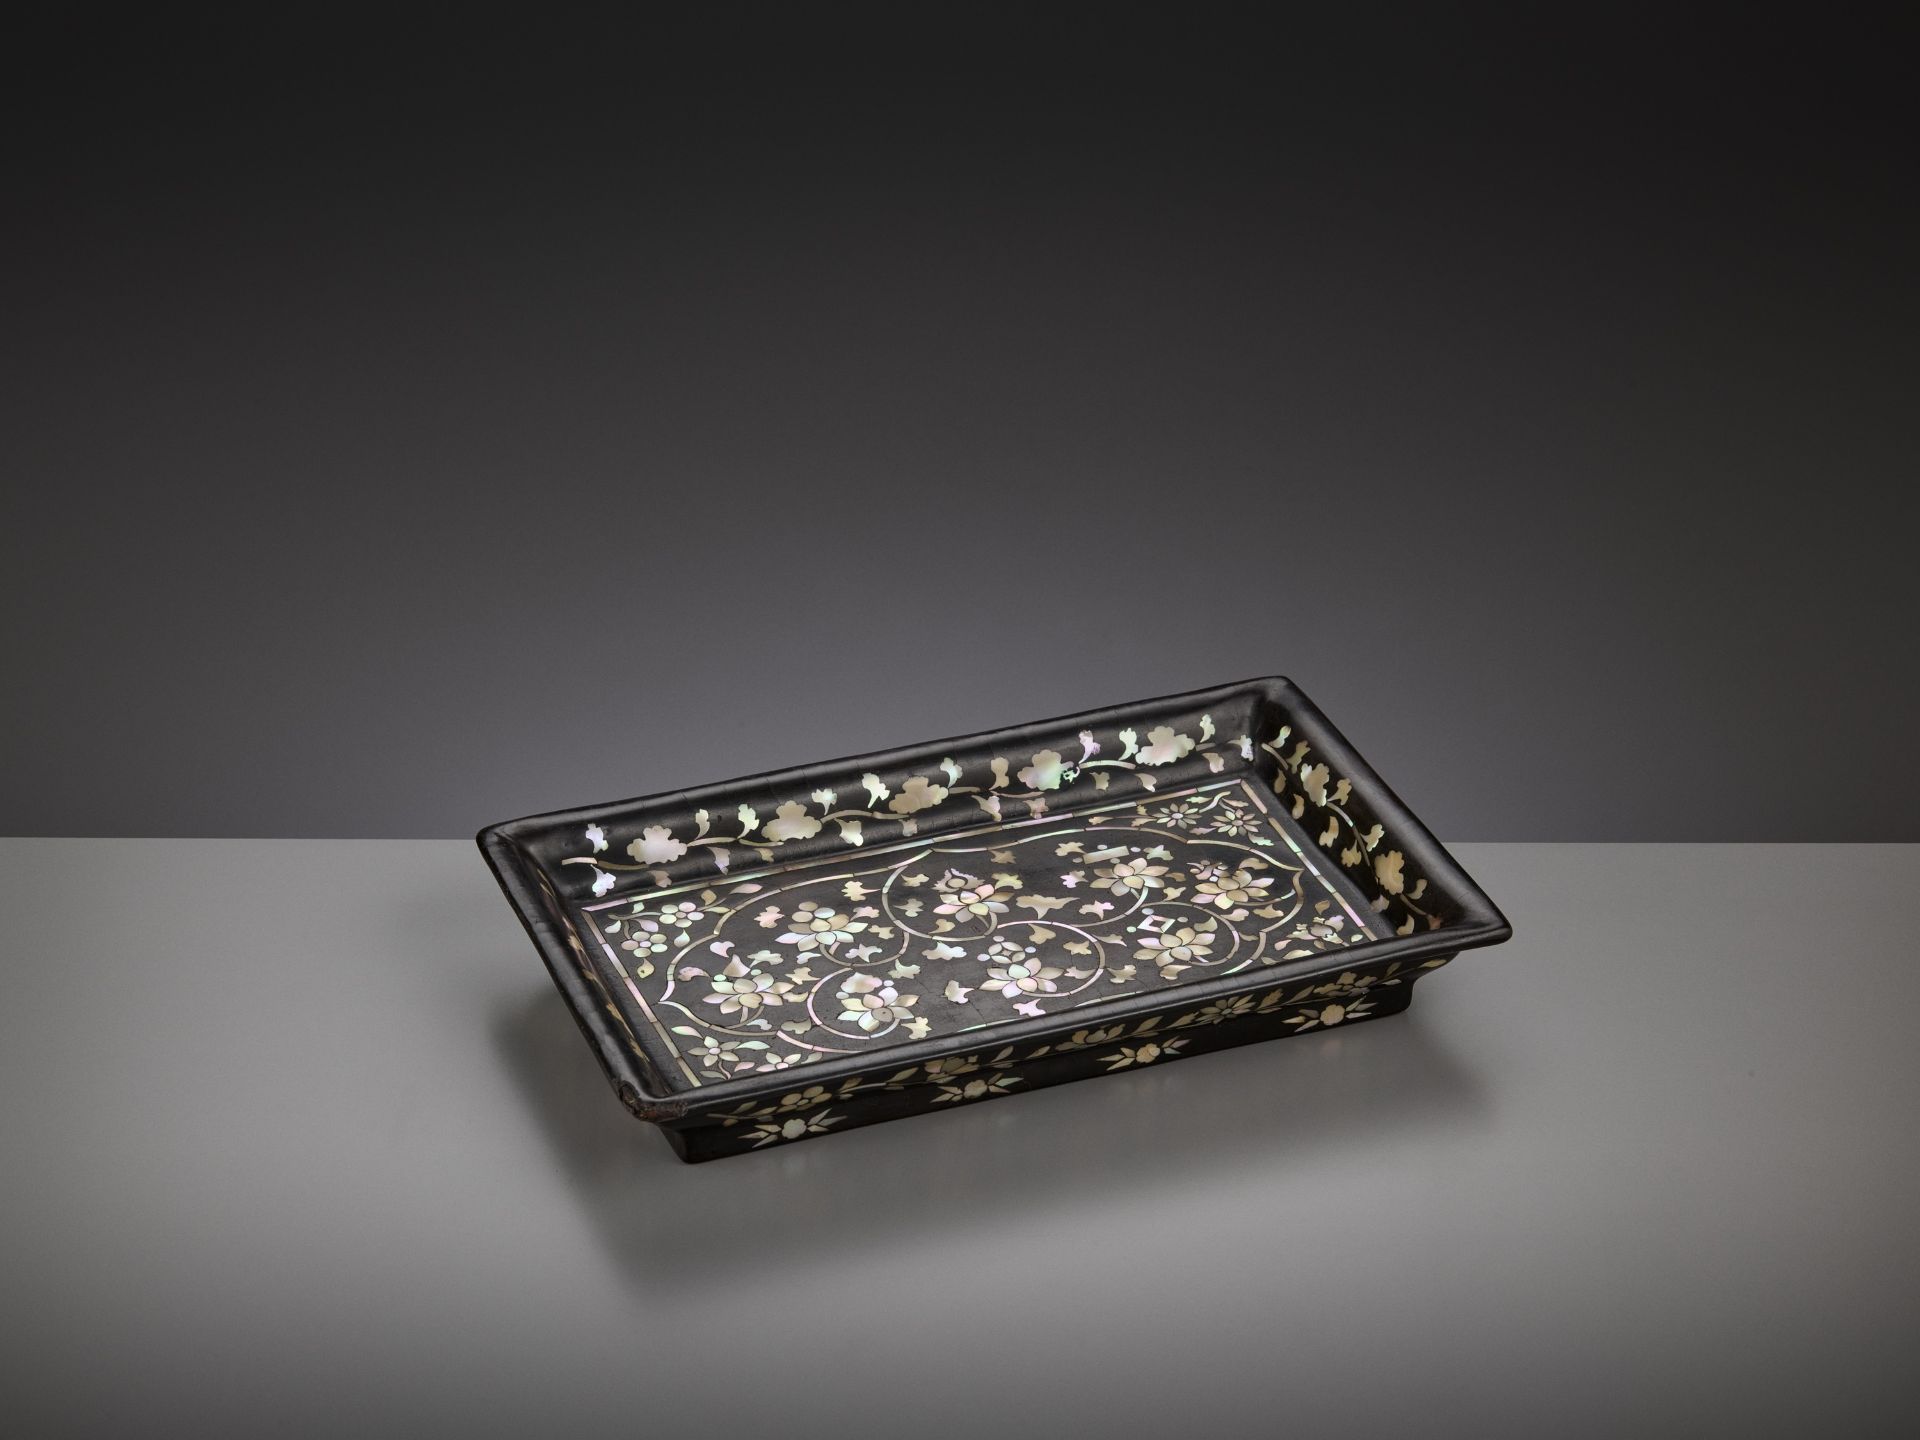 A MOTHER-OF-PEARL-INLAID BLACK LACQUER RECTANGULAR TRAY, JOSEON DYNASTY